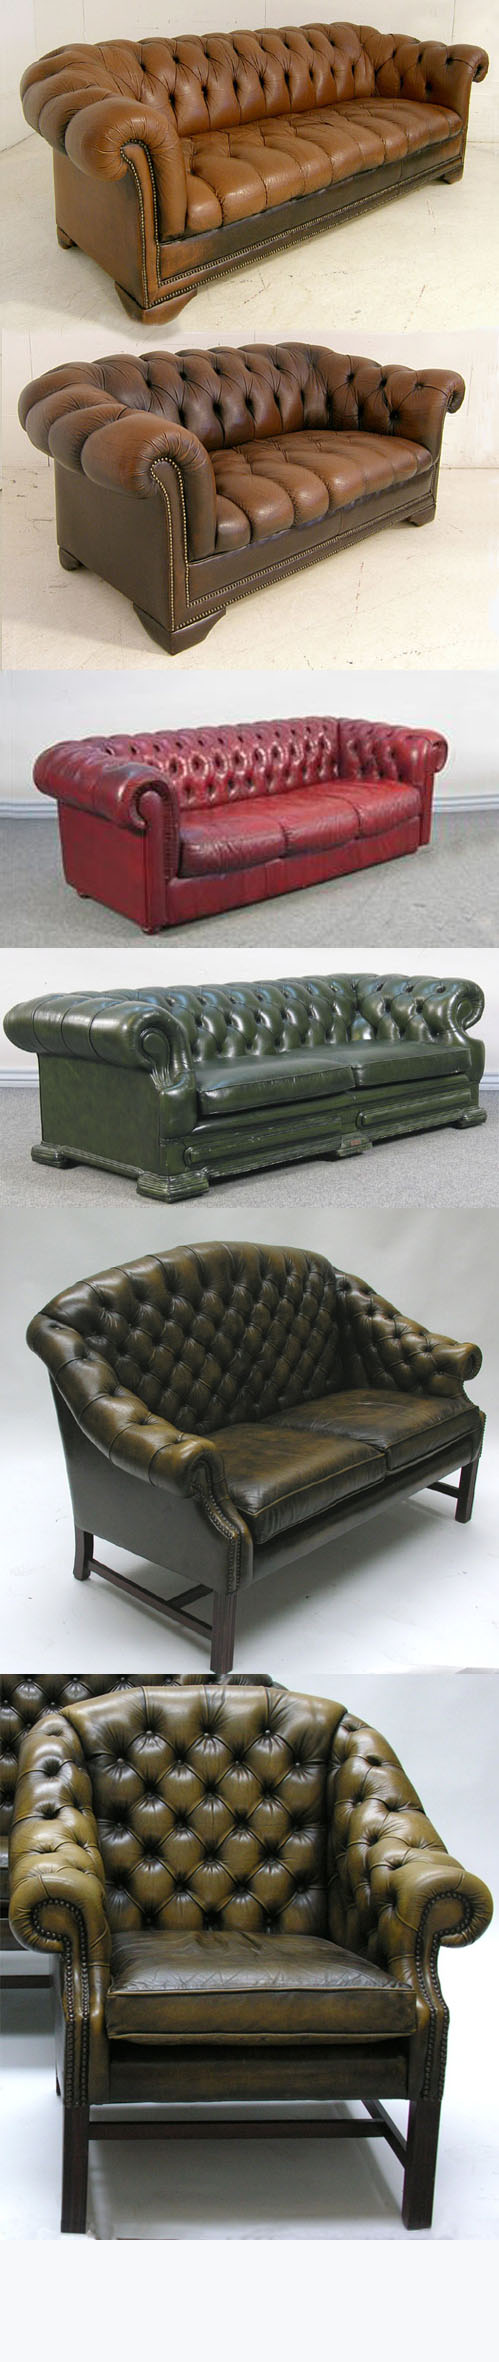 185-032499>185-03312 Chesterfield sofas - look under Chesterfield